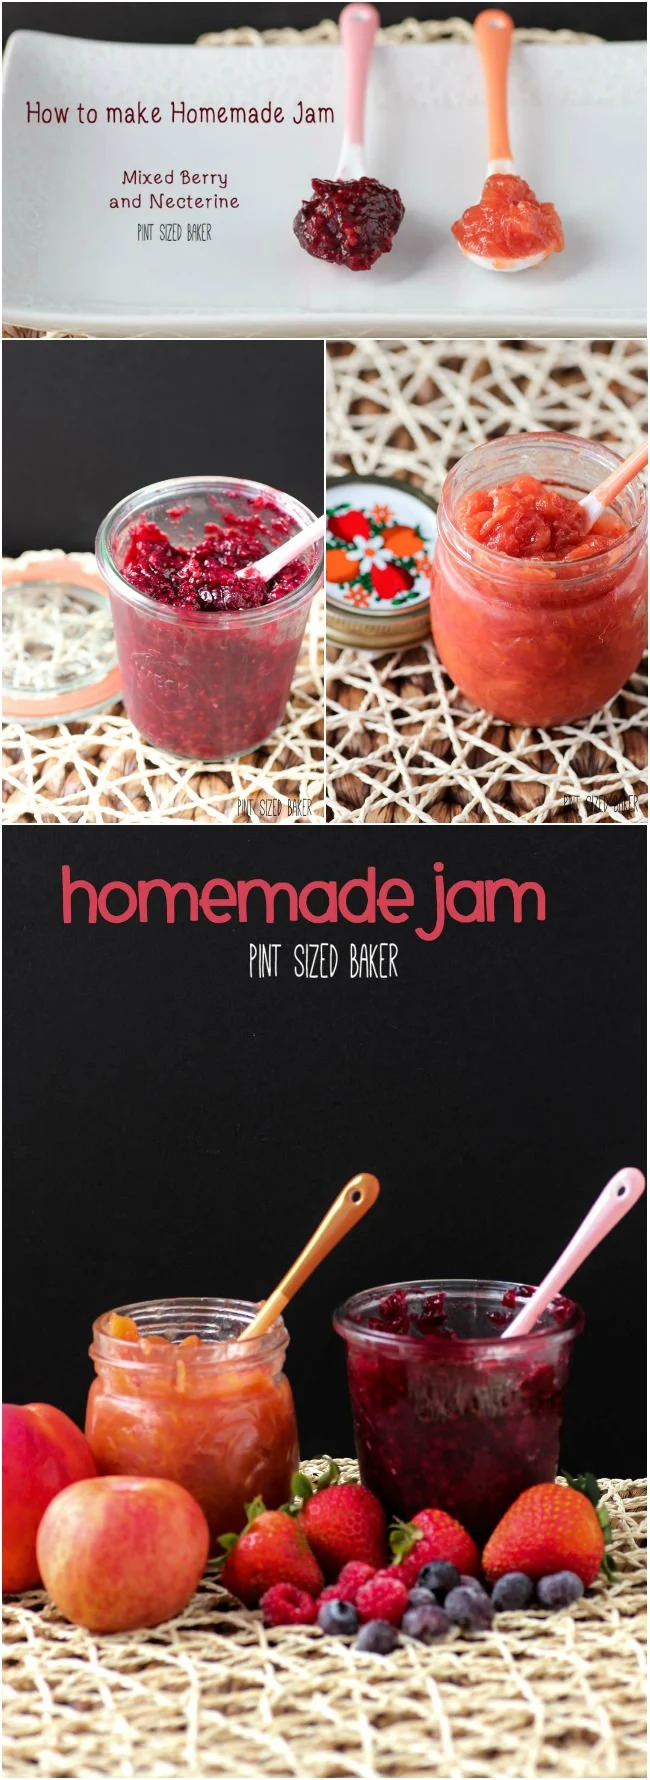 Making your own homemade jam with fresh, seasonal fruits is easy. I made mixed berries and a nectarine jam in an hour.